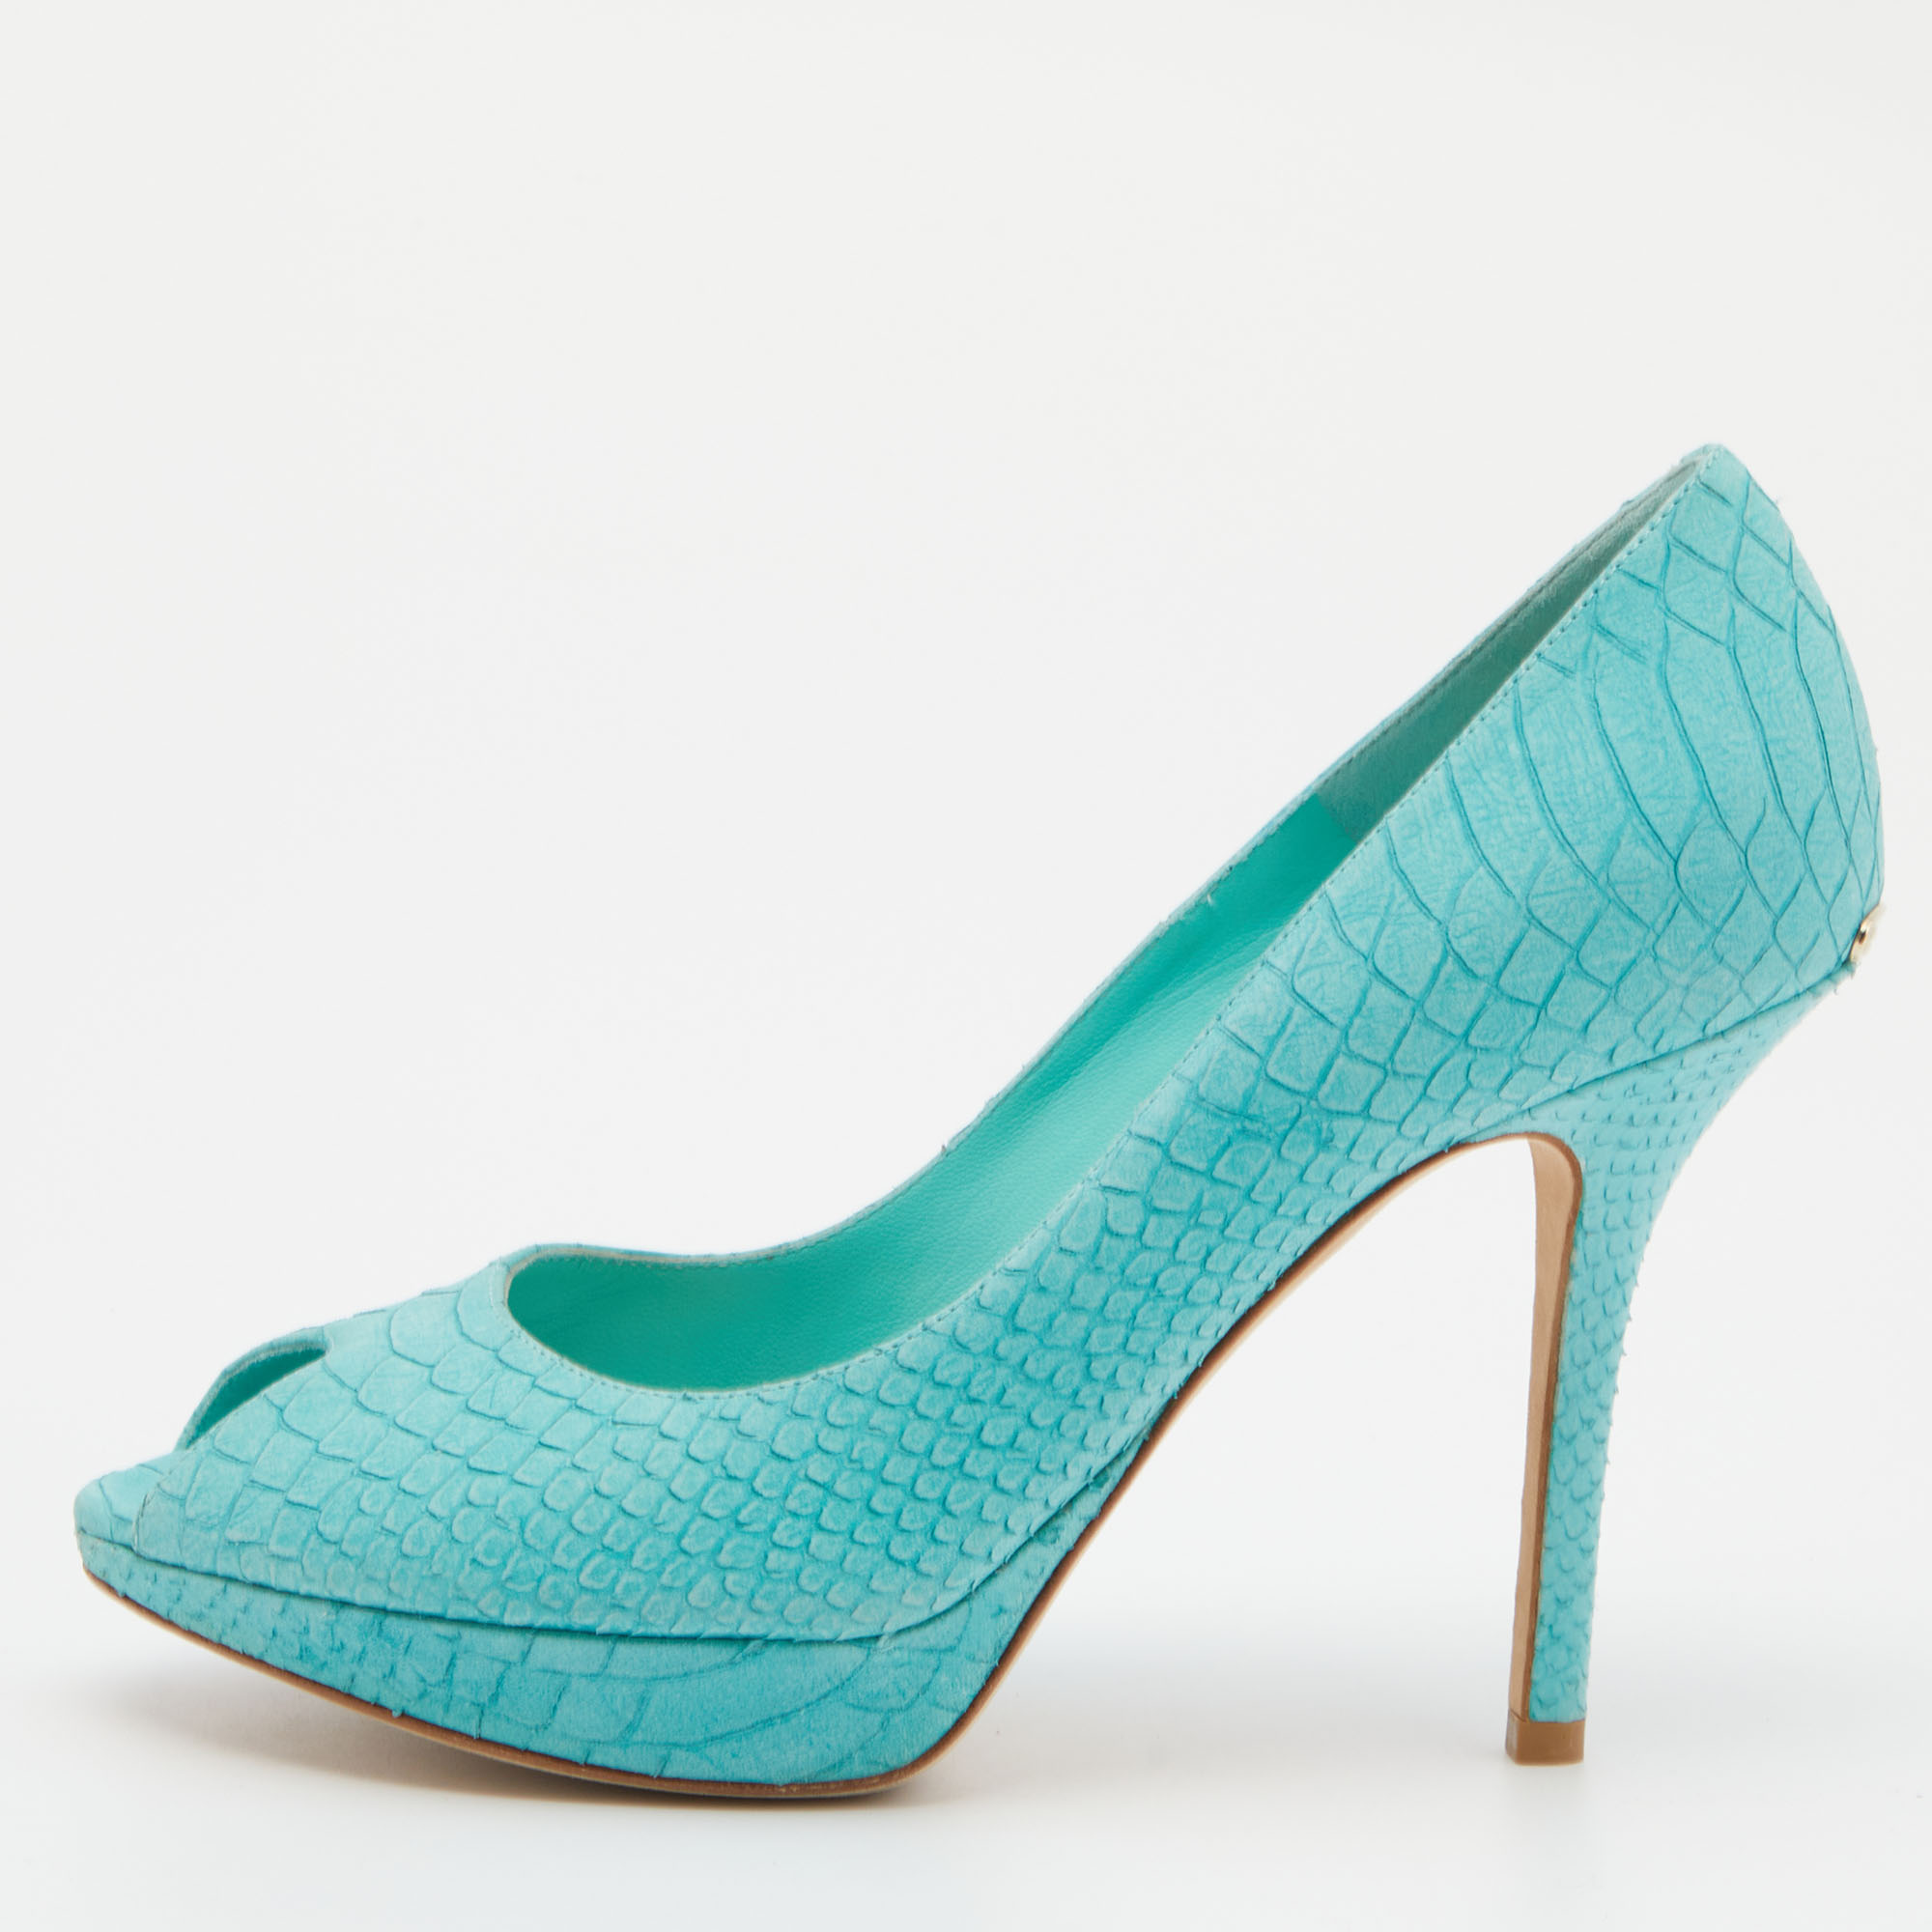 Dior turquoise python embossed leather miss dior peep toe pumps size 37.5